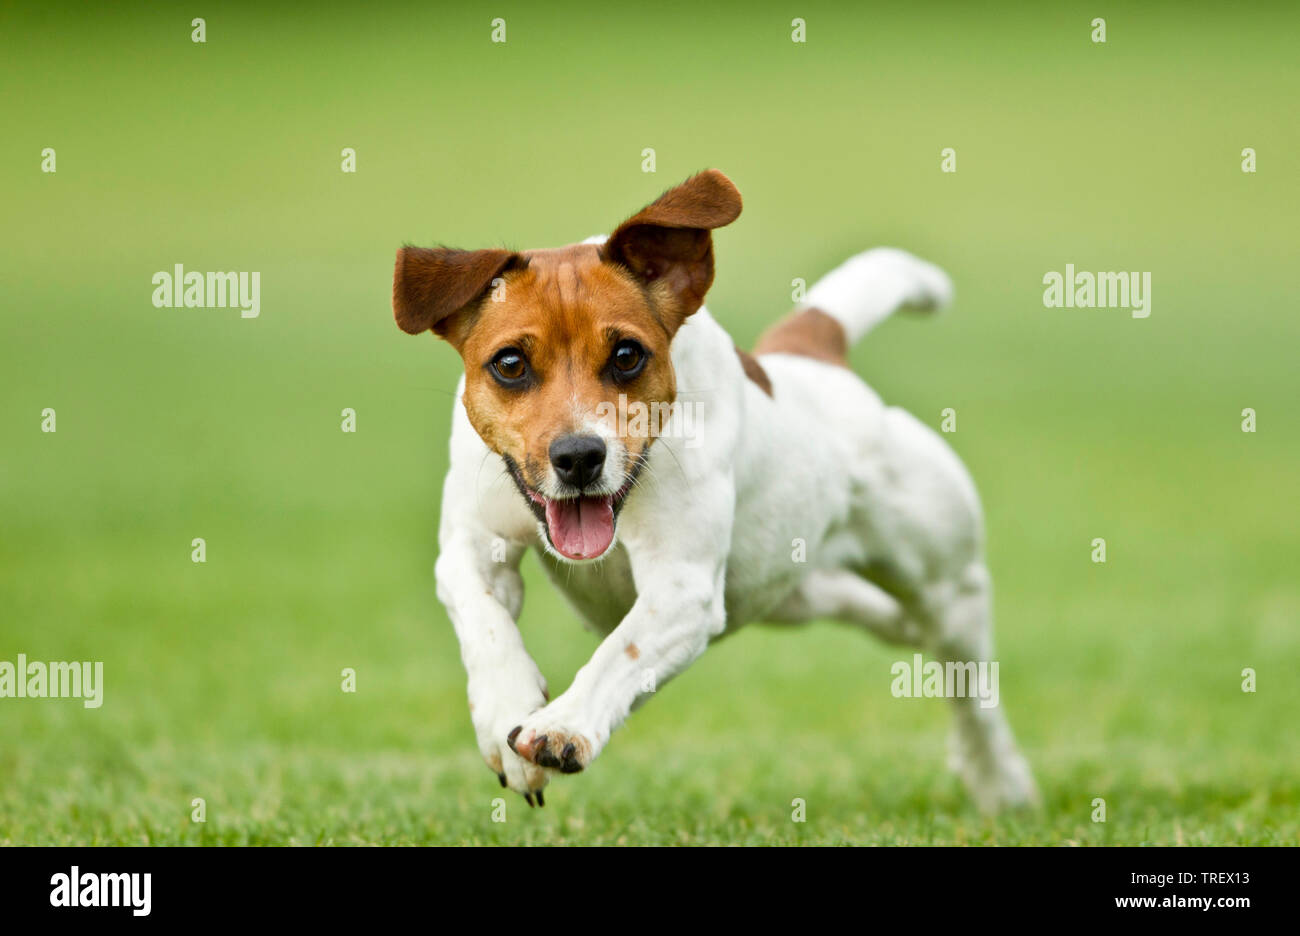 Jack Russell Terrier. Adult dog running on grass. Germany Stock Photo